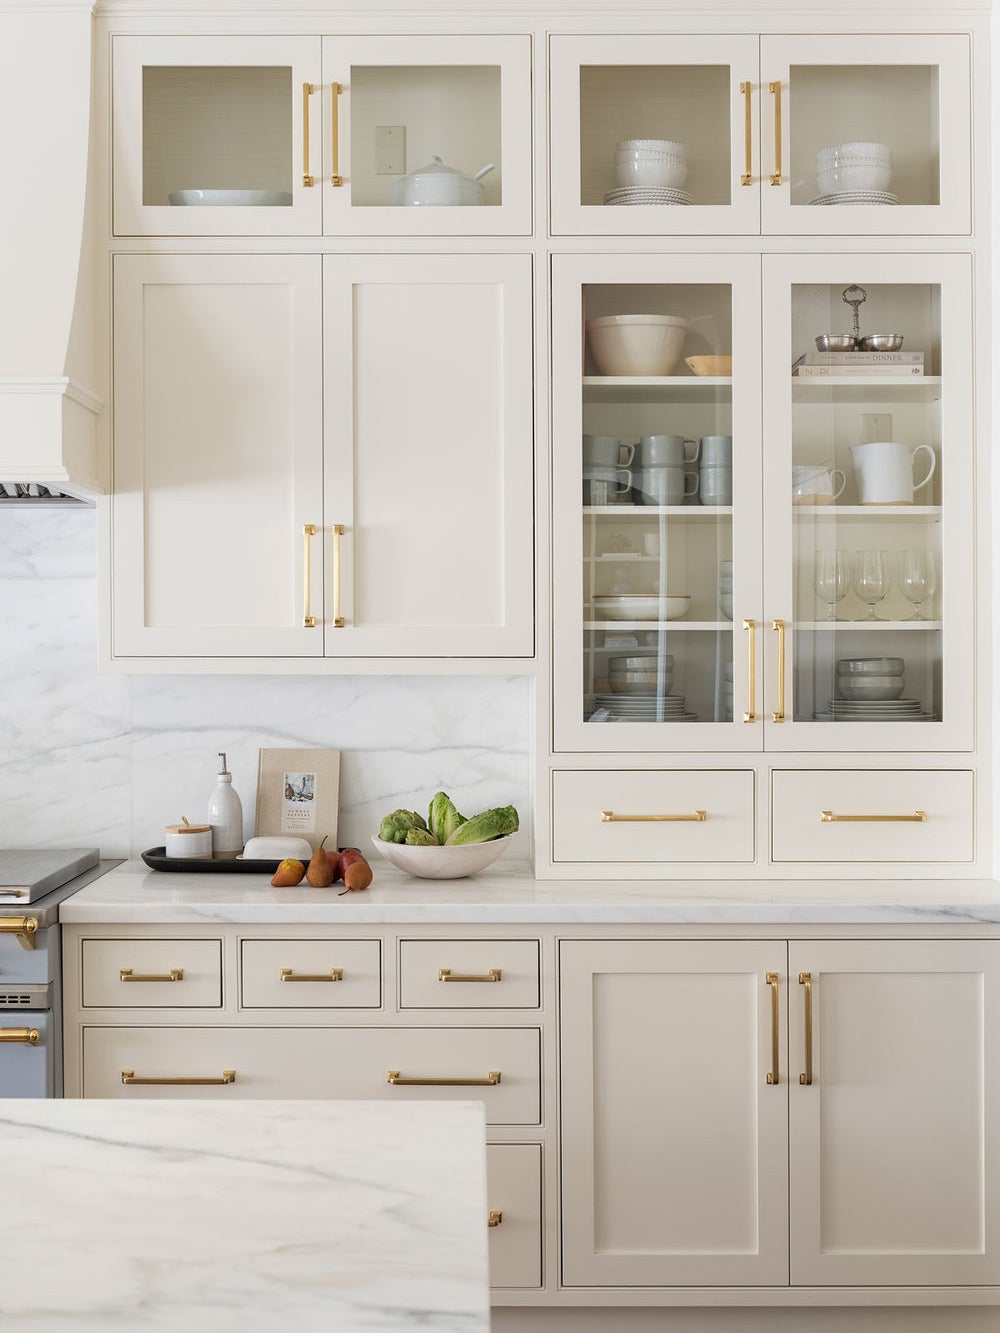 The 18 Best White Paints for Kitchen Cabinets in 18   domino